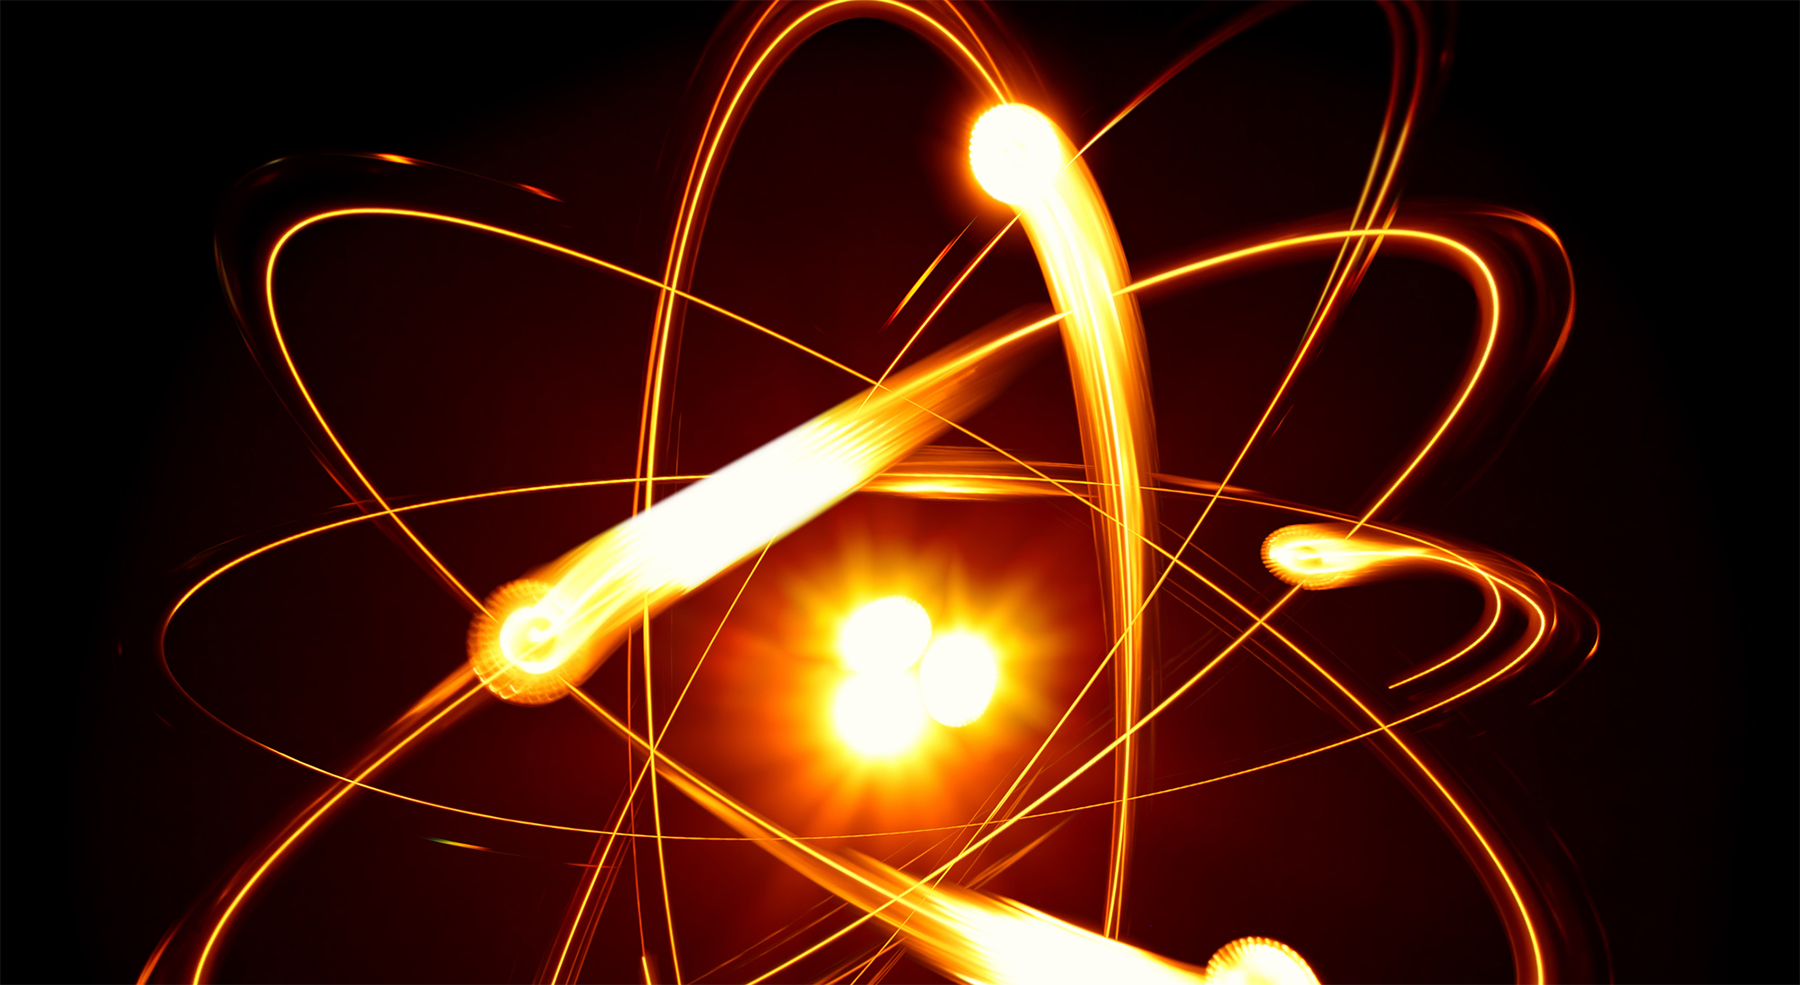 image of an illustrartion of an atom